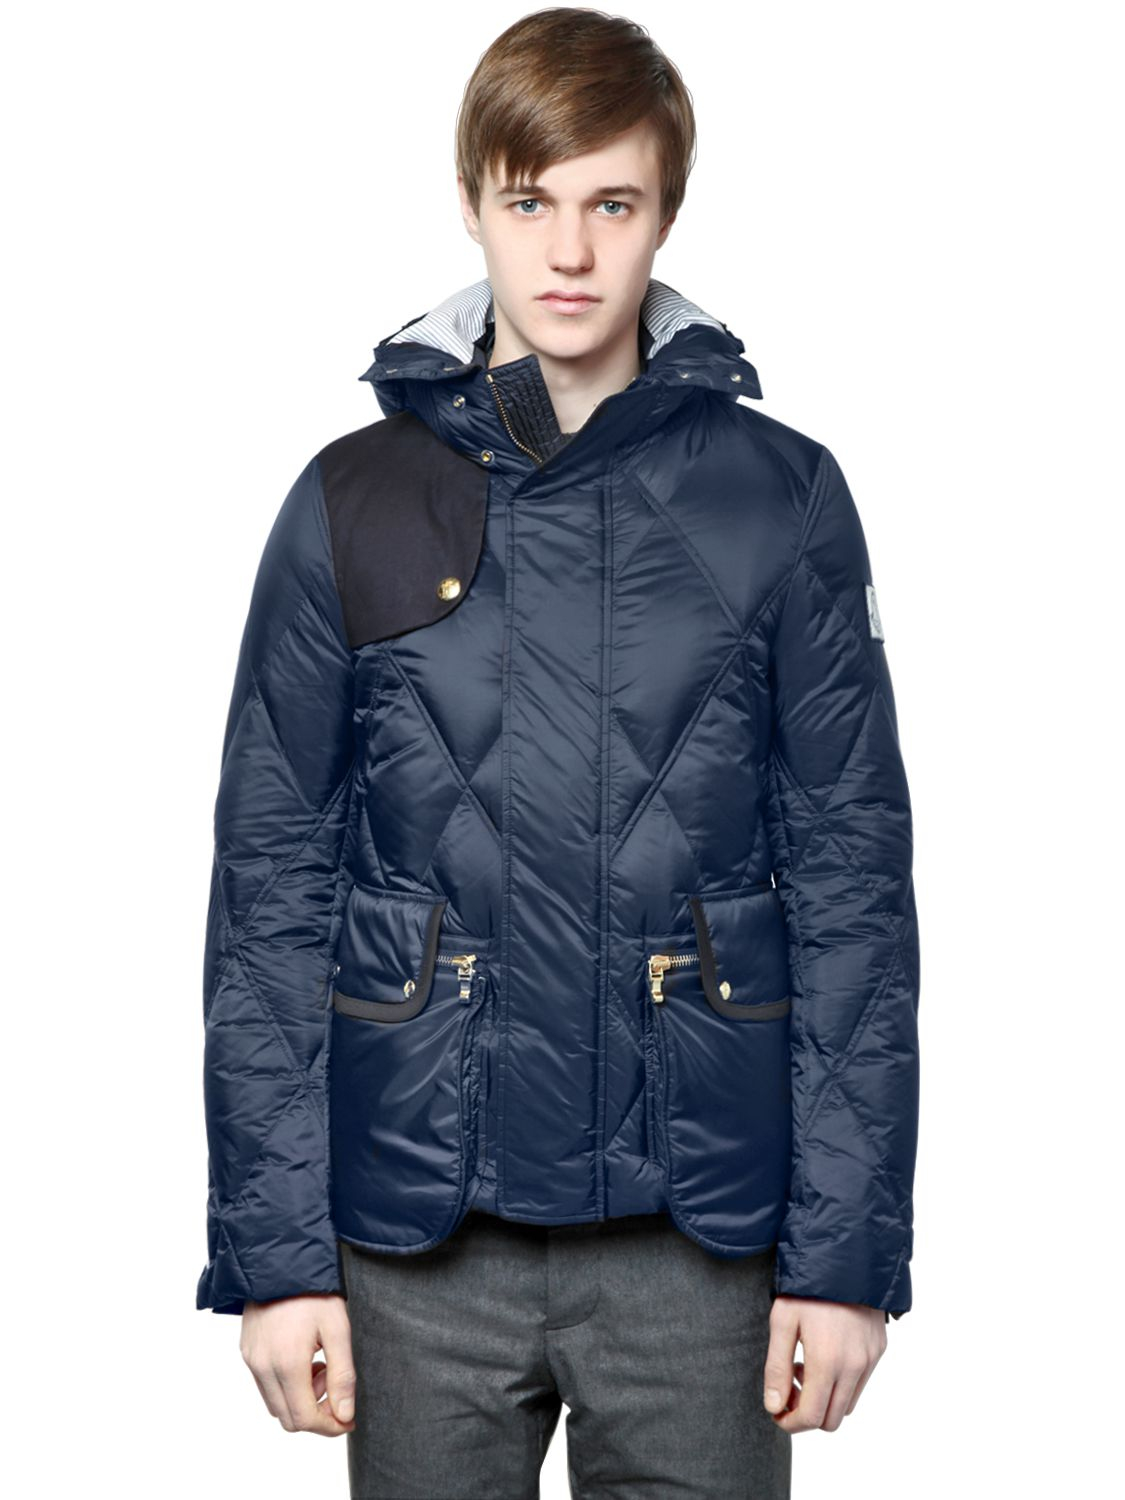 Moncler Gamme Bleu Quilted Nylon Down Jacket in Navy (Blue) for Men - Lyst